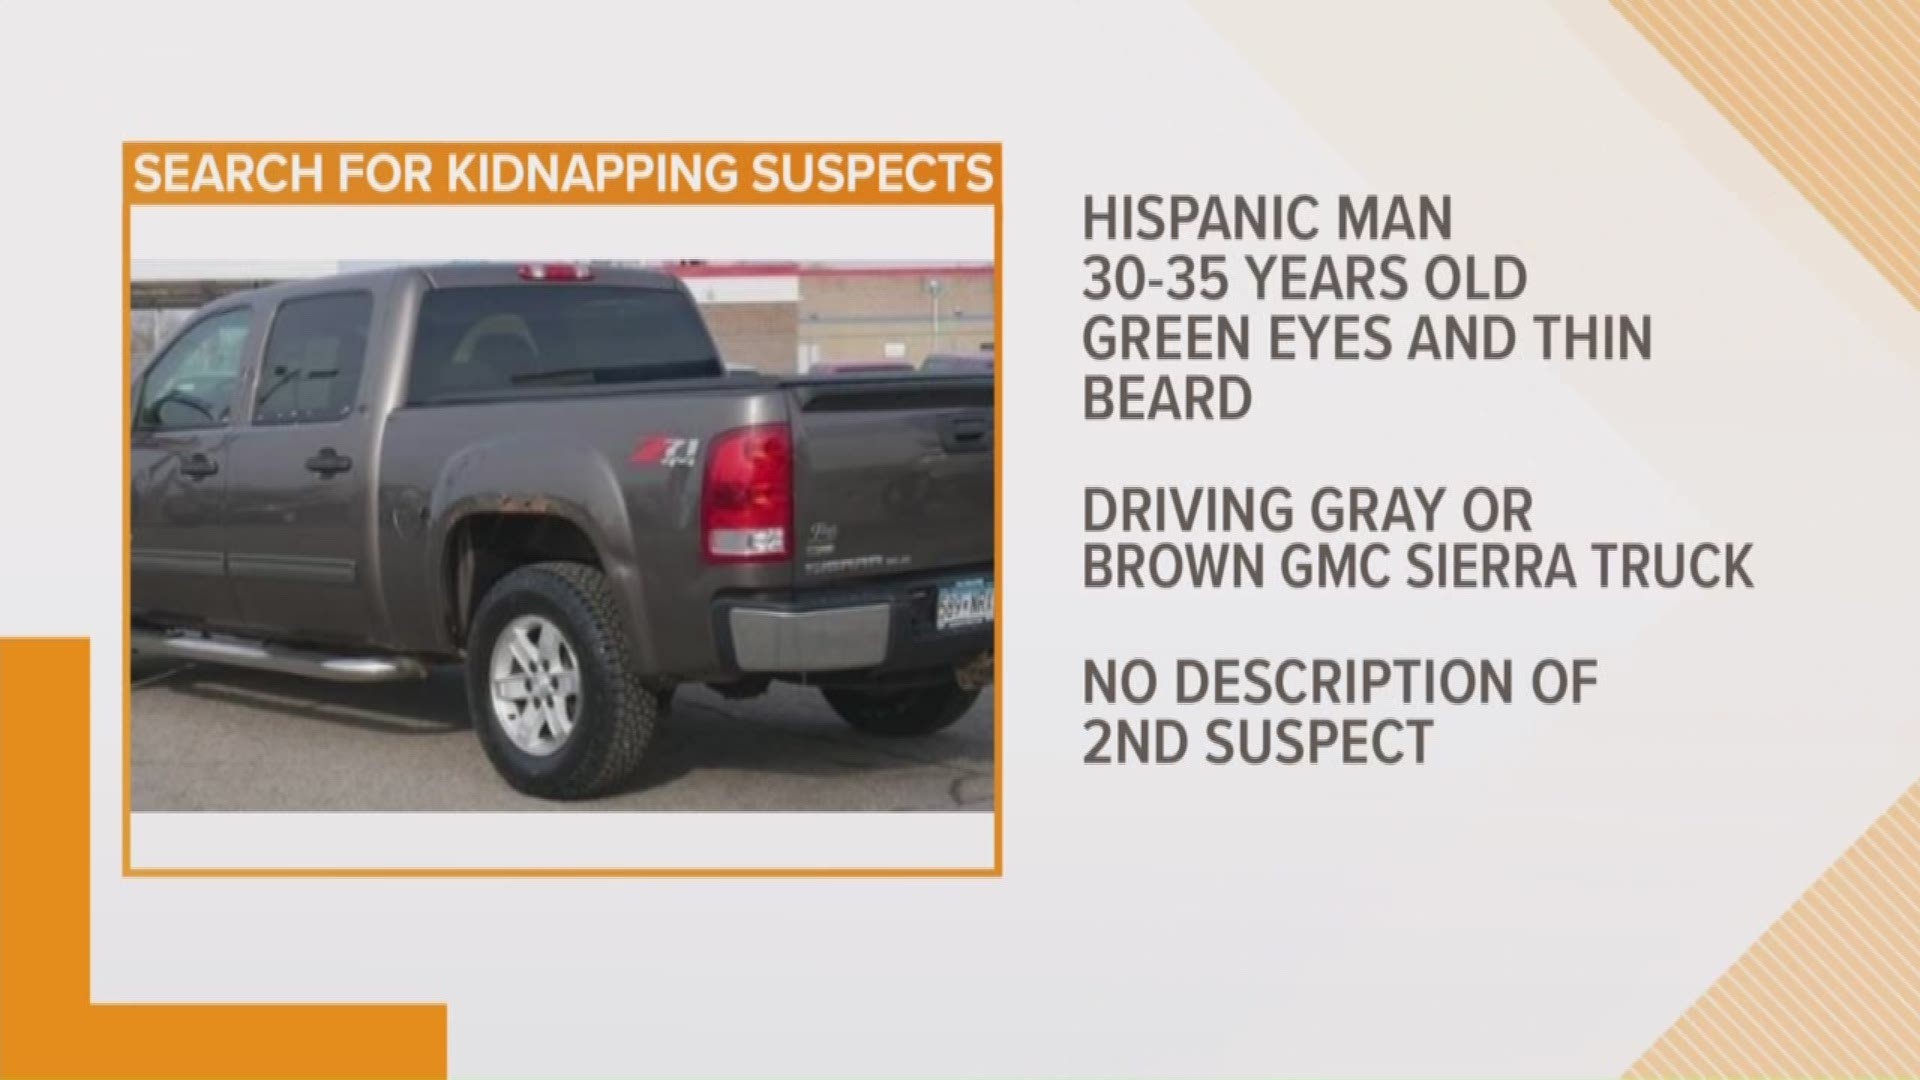 Austin police are searching for two people accused of kidnapping a 15-year-old girl.